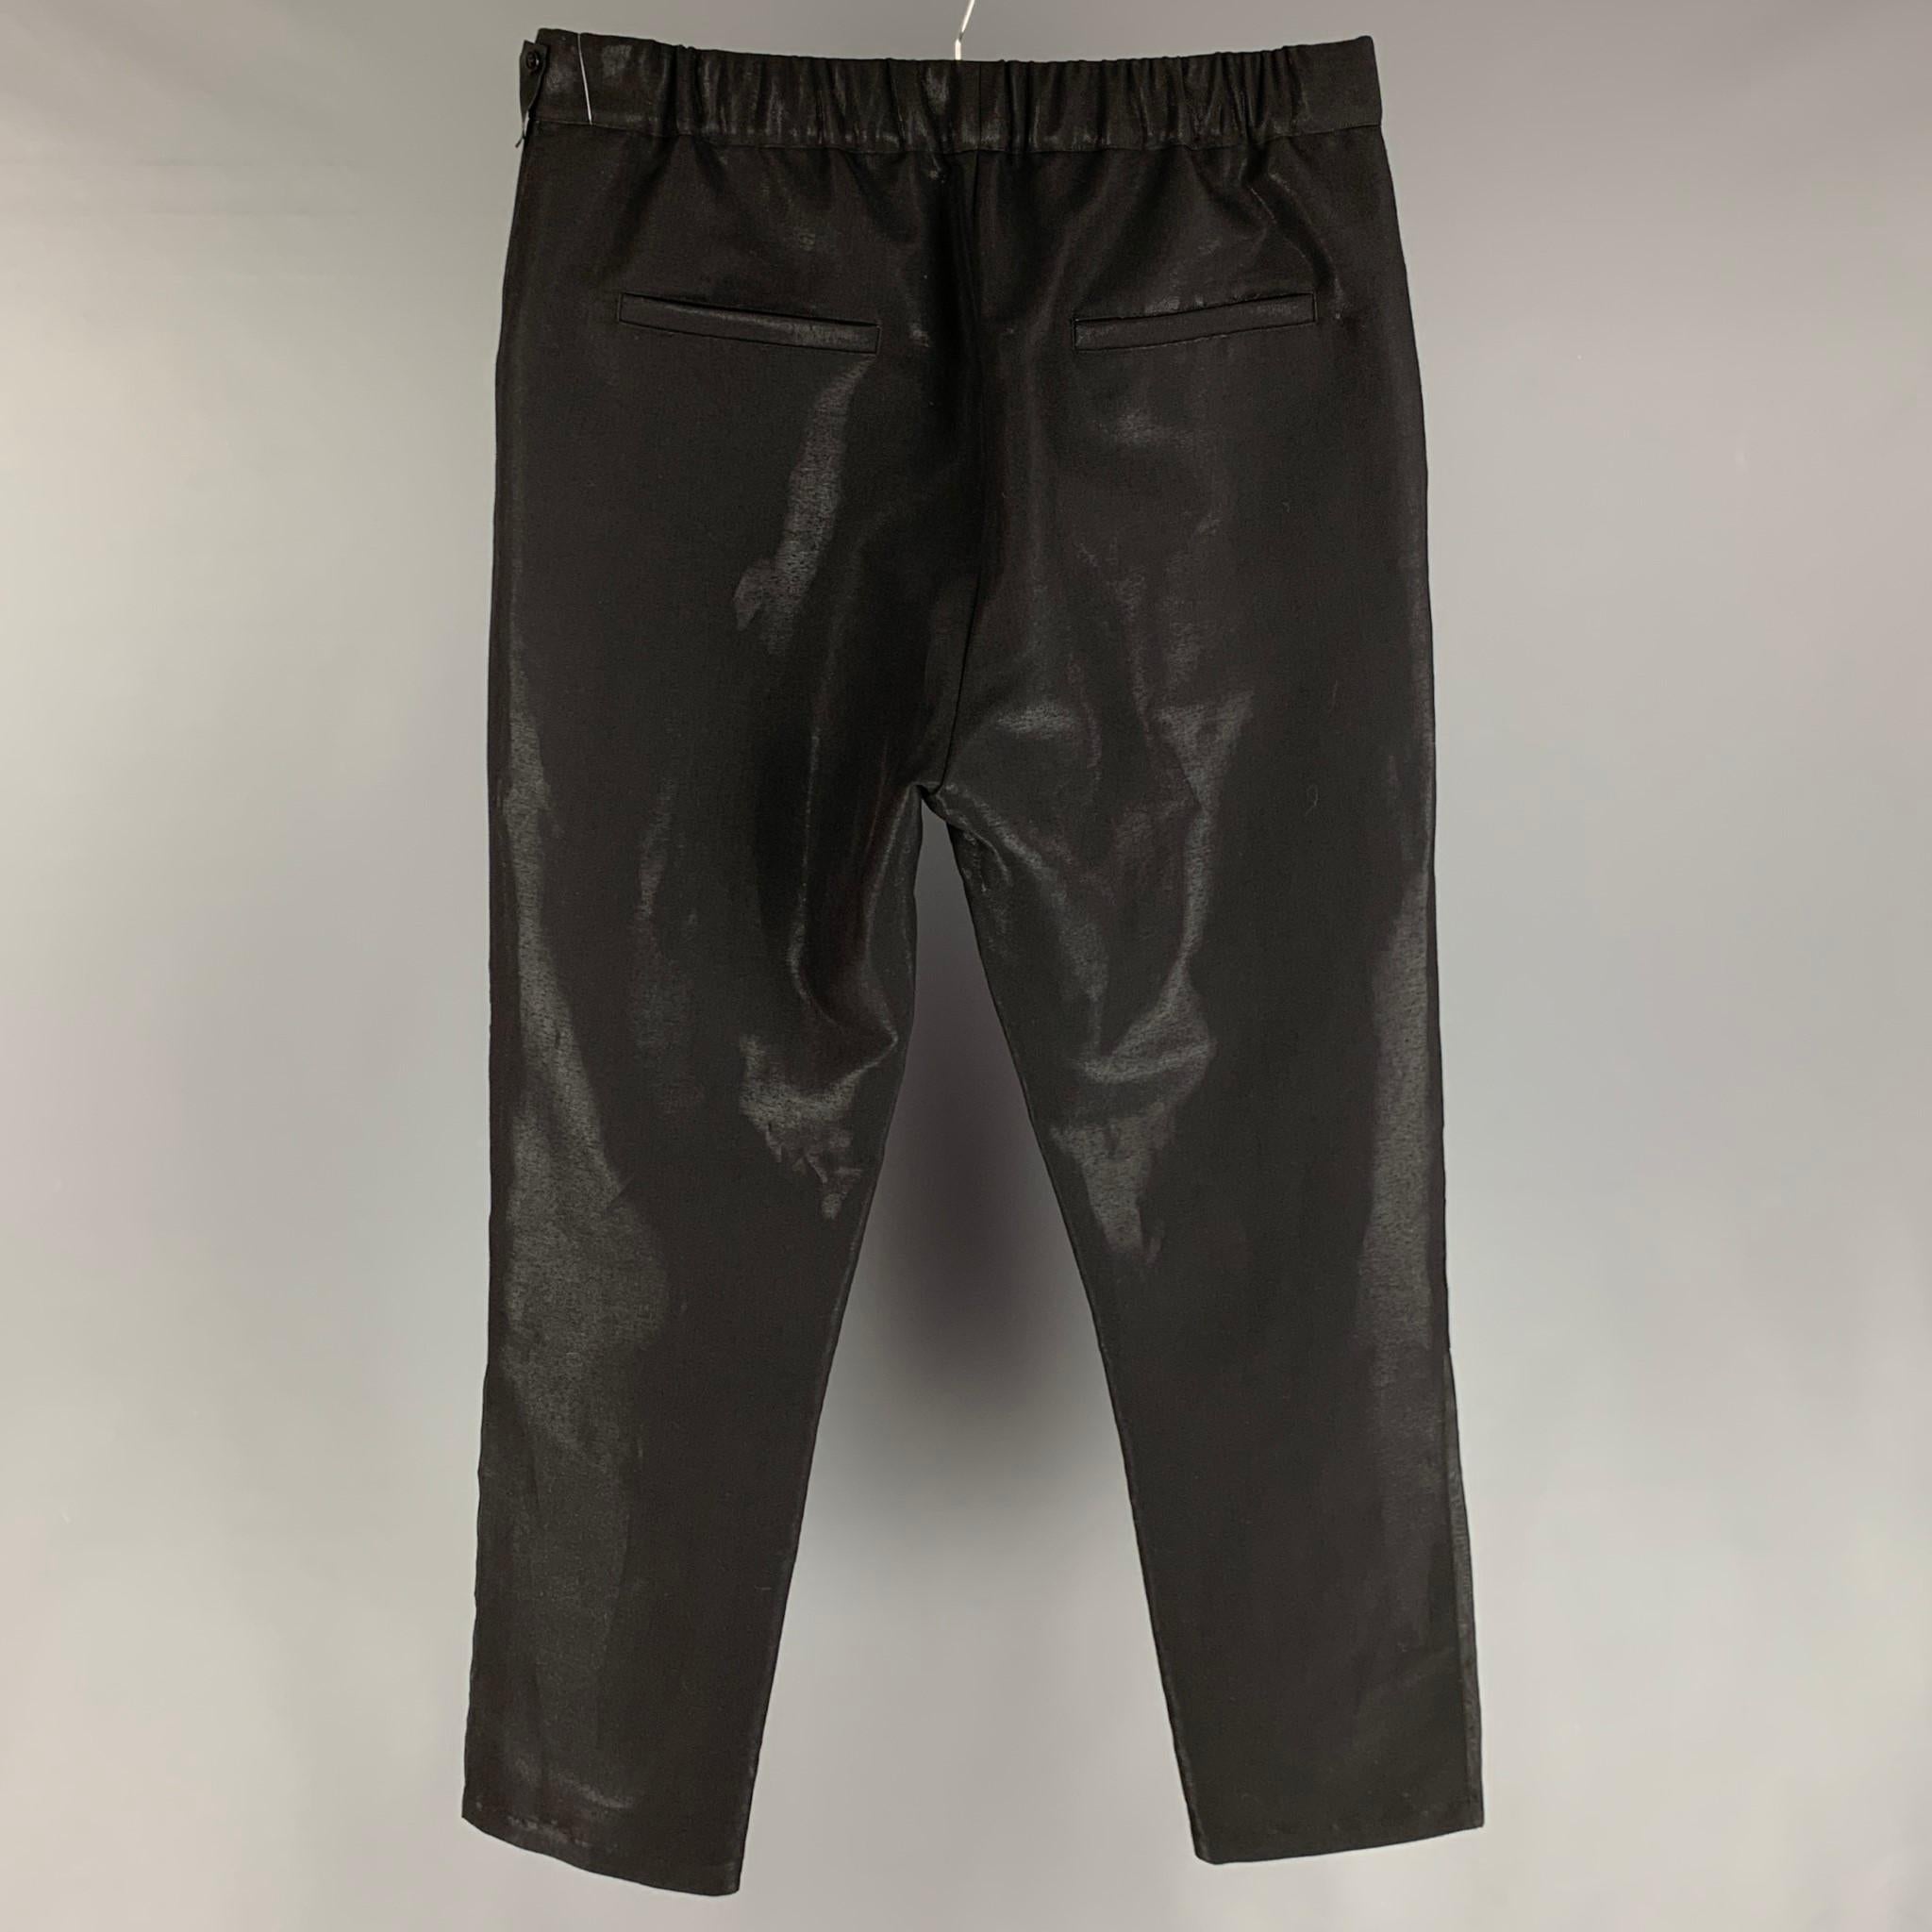 FENDI pants comes in a black virgin wool / polyester featuring a cargo style, sheer patch pockets, drawstring, elastic waistband, and a zip fly closure. Made in Italy. 

Excellent Pre-Owned Condition.
Marked: 5

Measurements:

Waist: 34 in.
Rise: 14